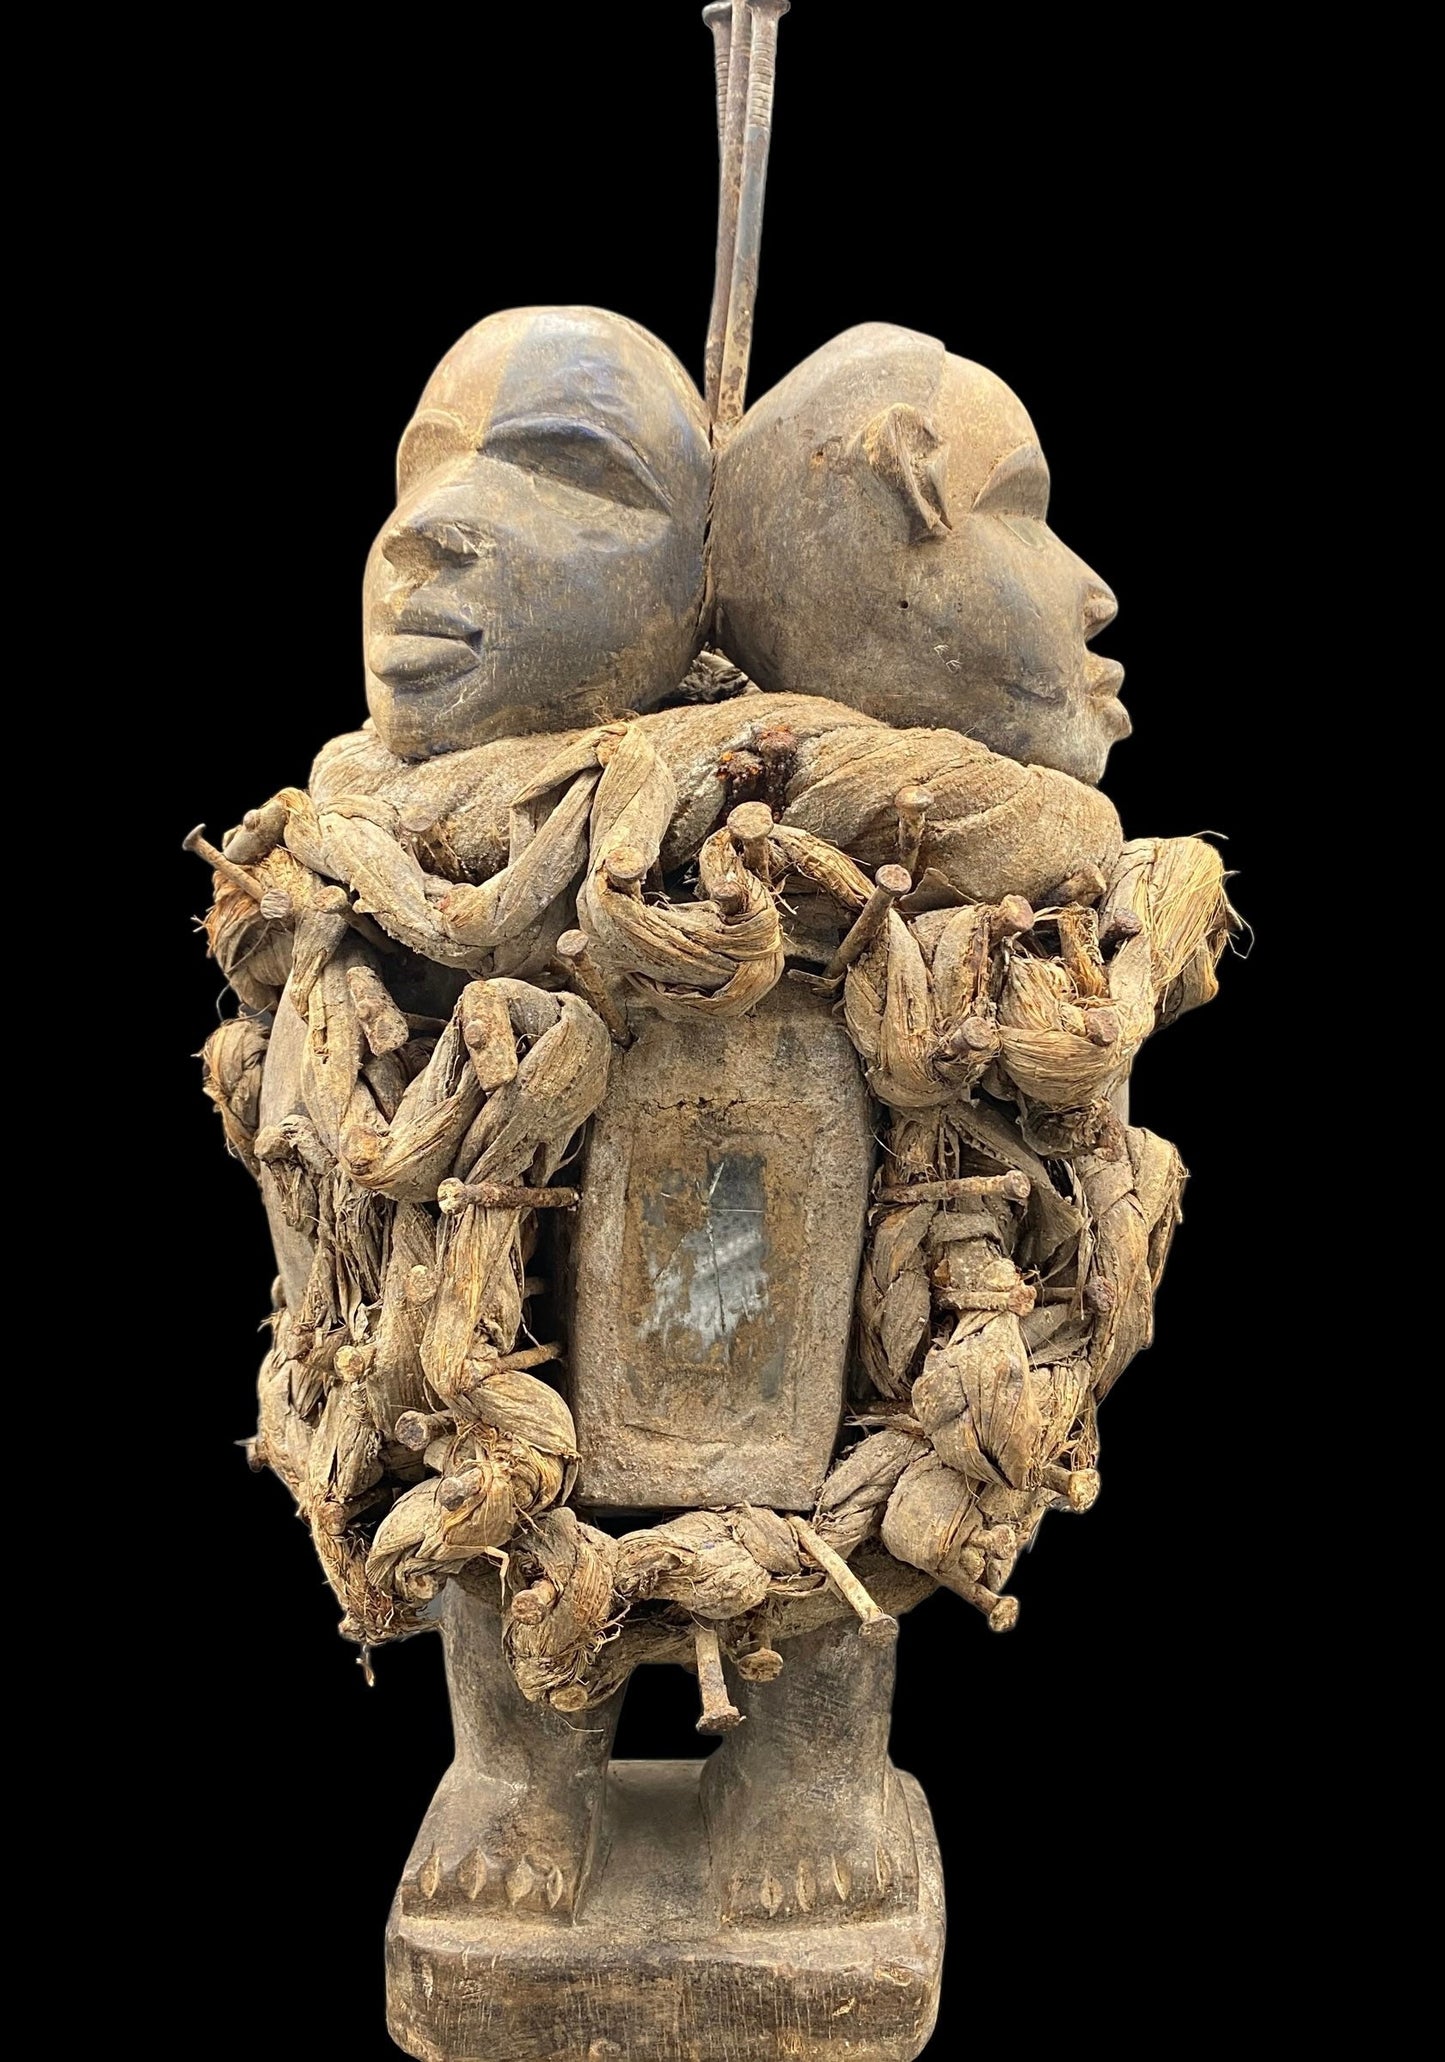 Last One! Large Nkisi Two-Headed Statue with Glass + Nkondi + Shigidi + Fetish from Kongo for Protection + One of a Kind